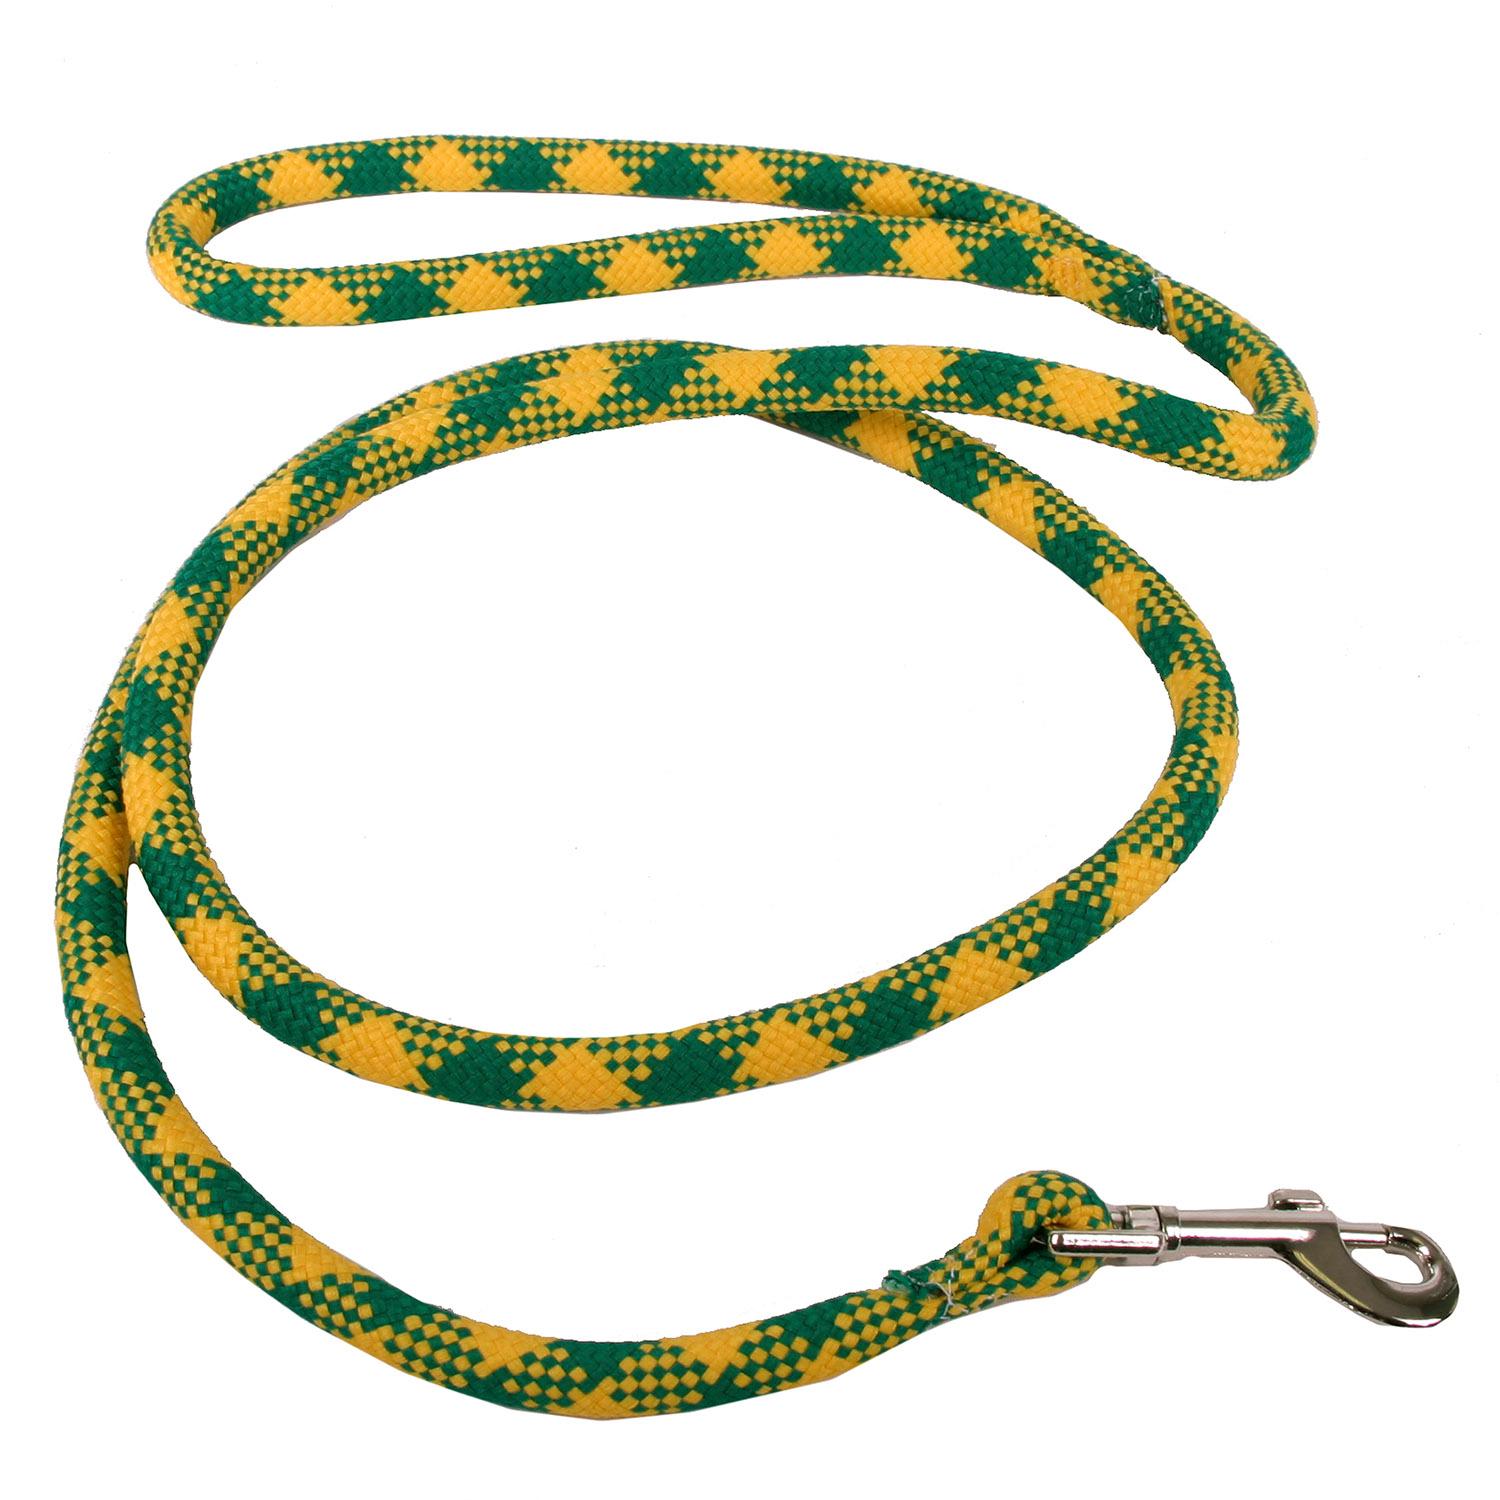 Round Braided Team Colors Dog Leash by Yellow Dog - Gold and Green